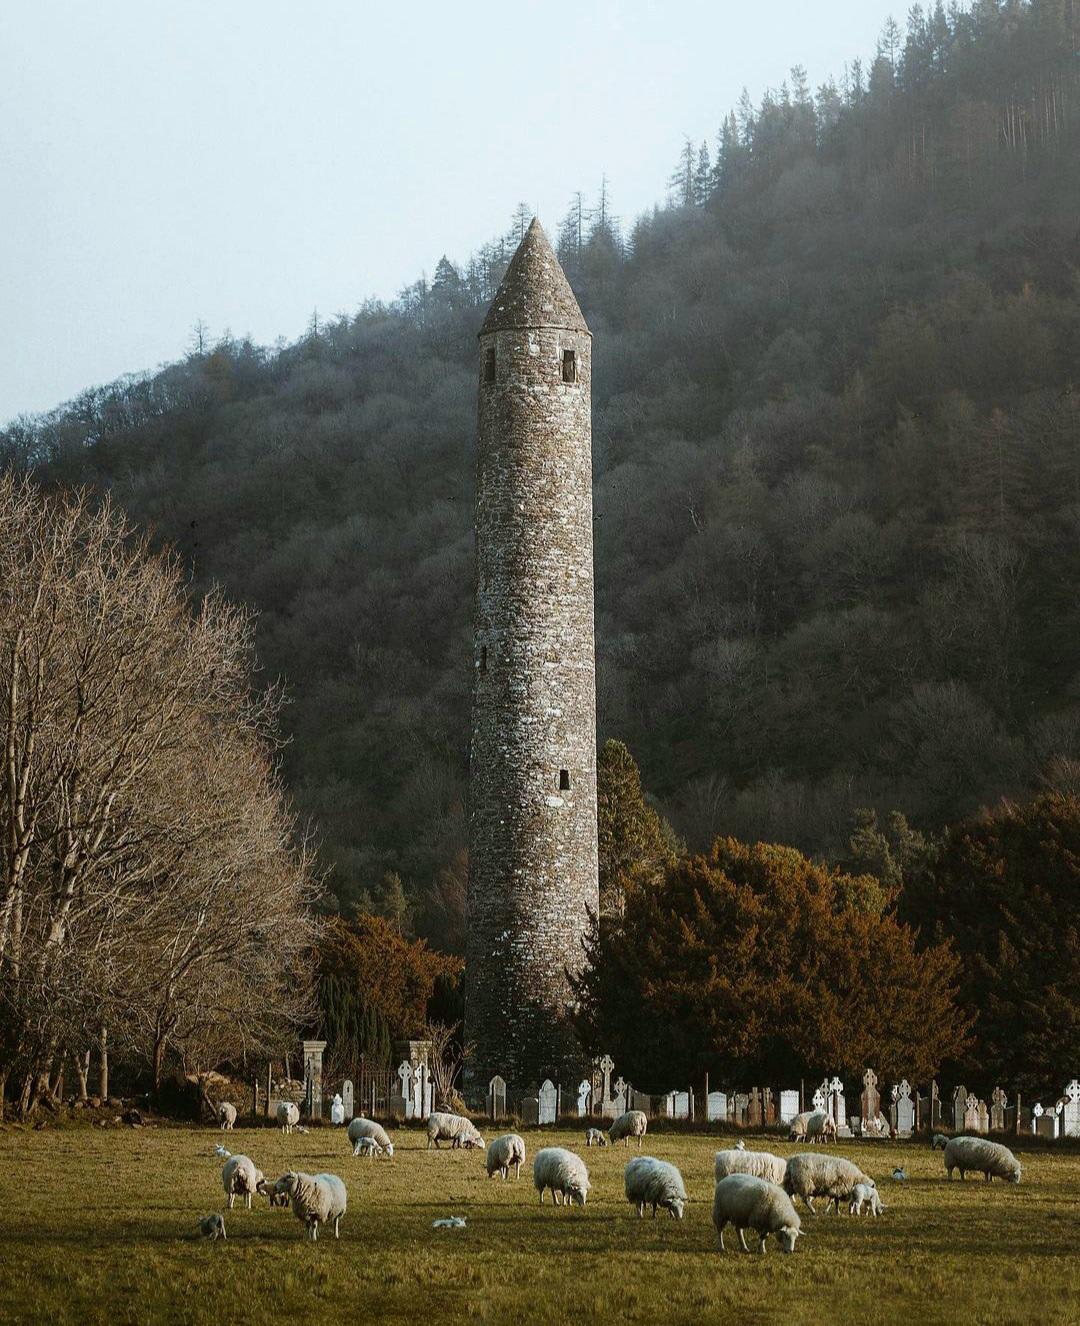 The 11th century Round Tower of Glendalough, a monastery founded in the 6th century in the Wicklow Mountains, Ireland.